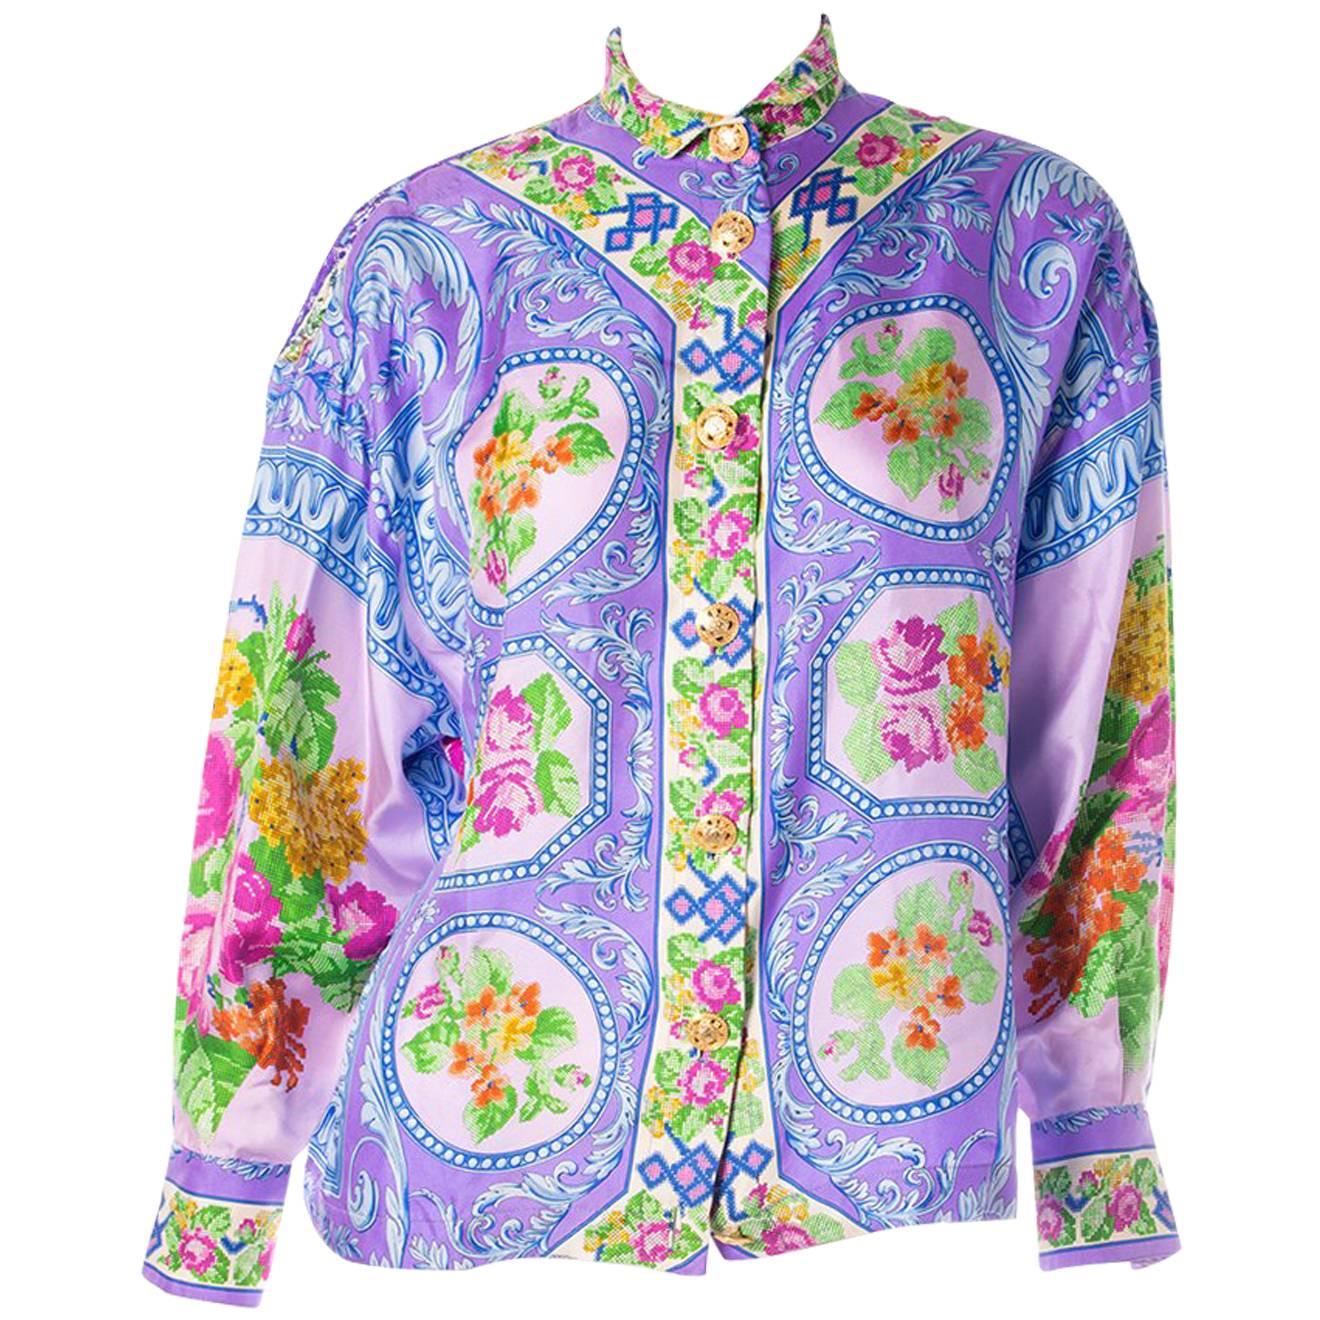 Gianni Versace Rare Silk Floral Lace Cutwork Baroque Shirt For Sale